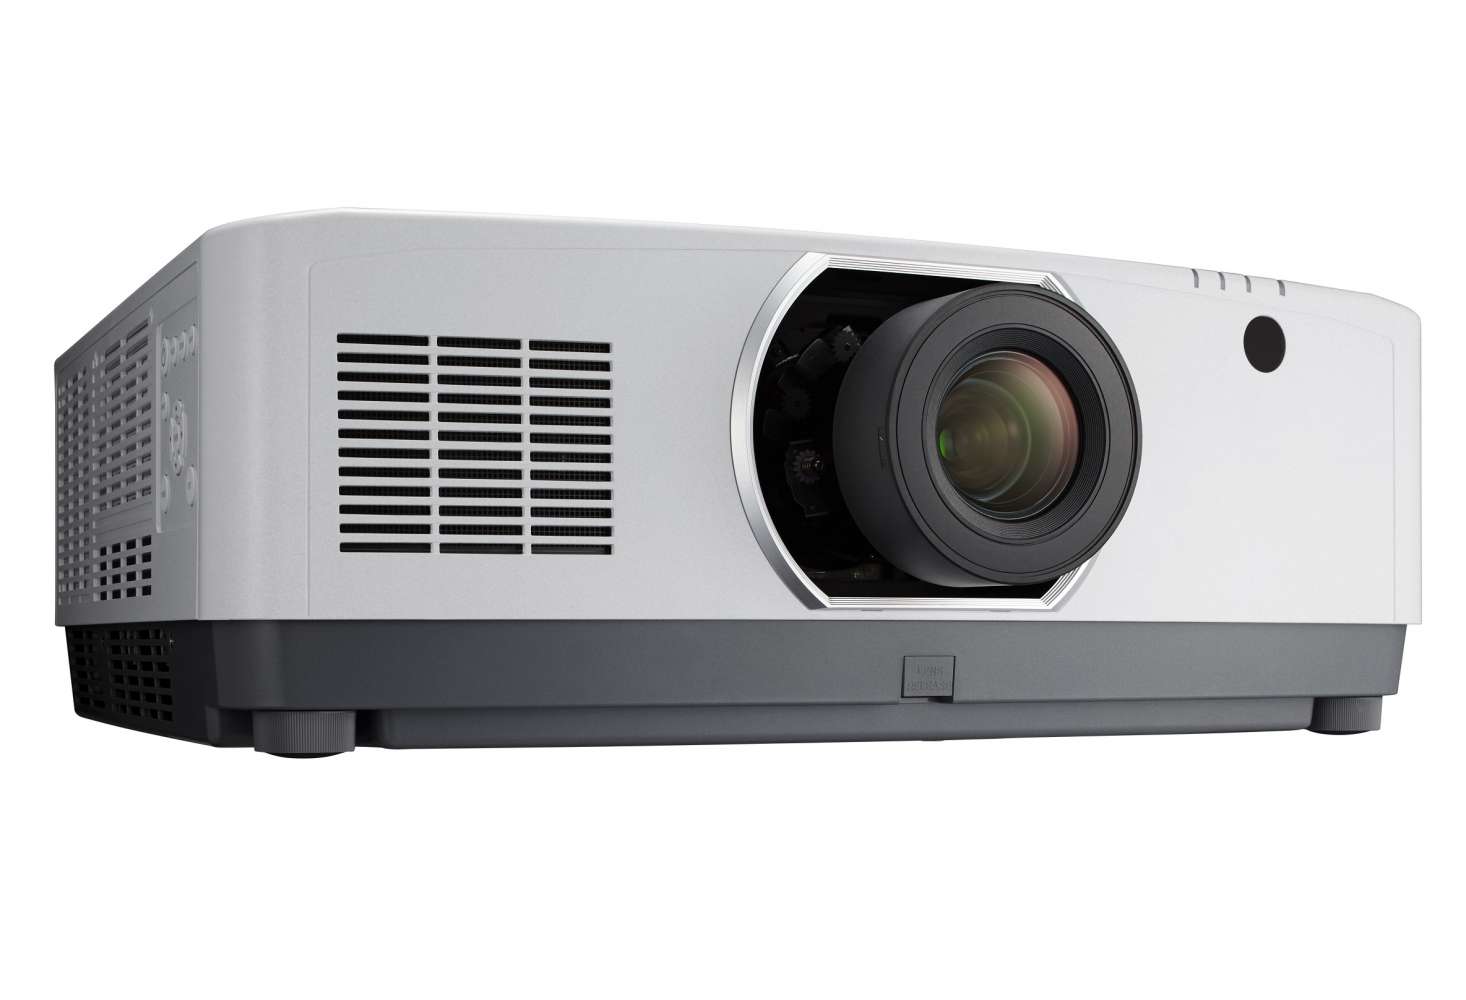 The new PA653UL laser projector will be available in April 2017 and the PA803UL will follow in August